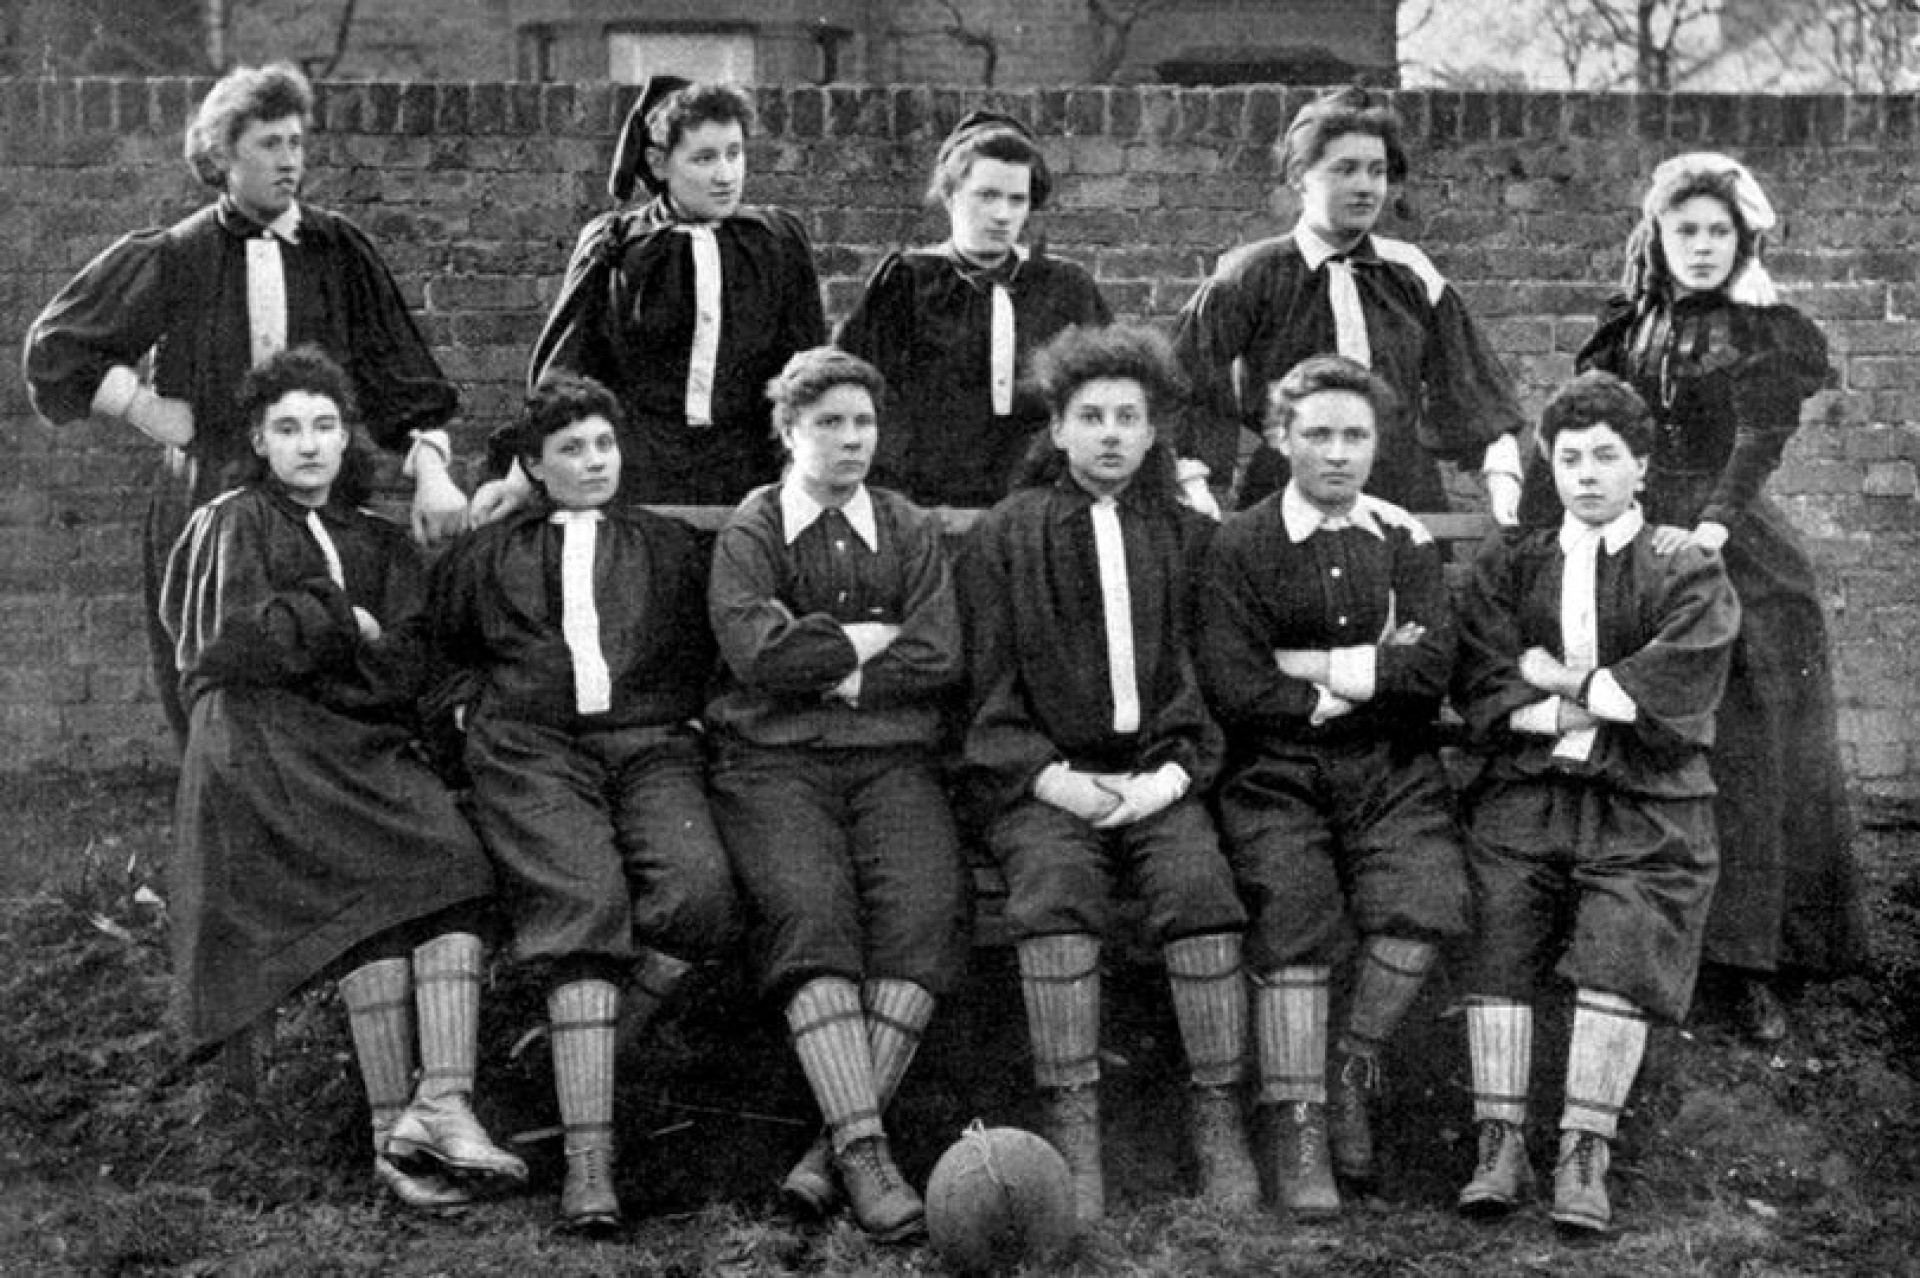 The first women's soccer game: Scotland?